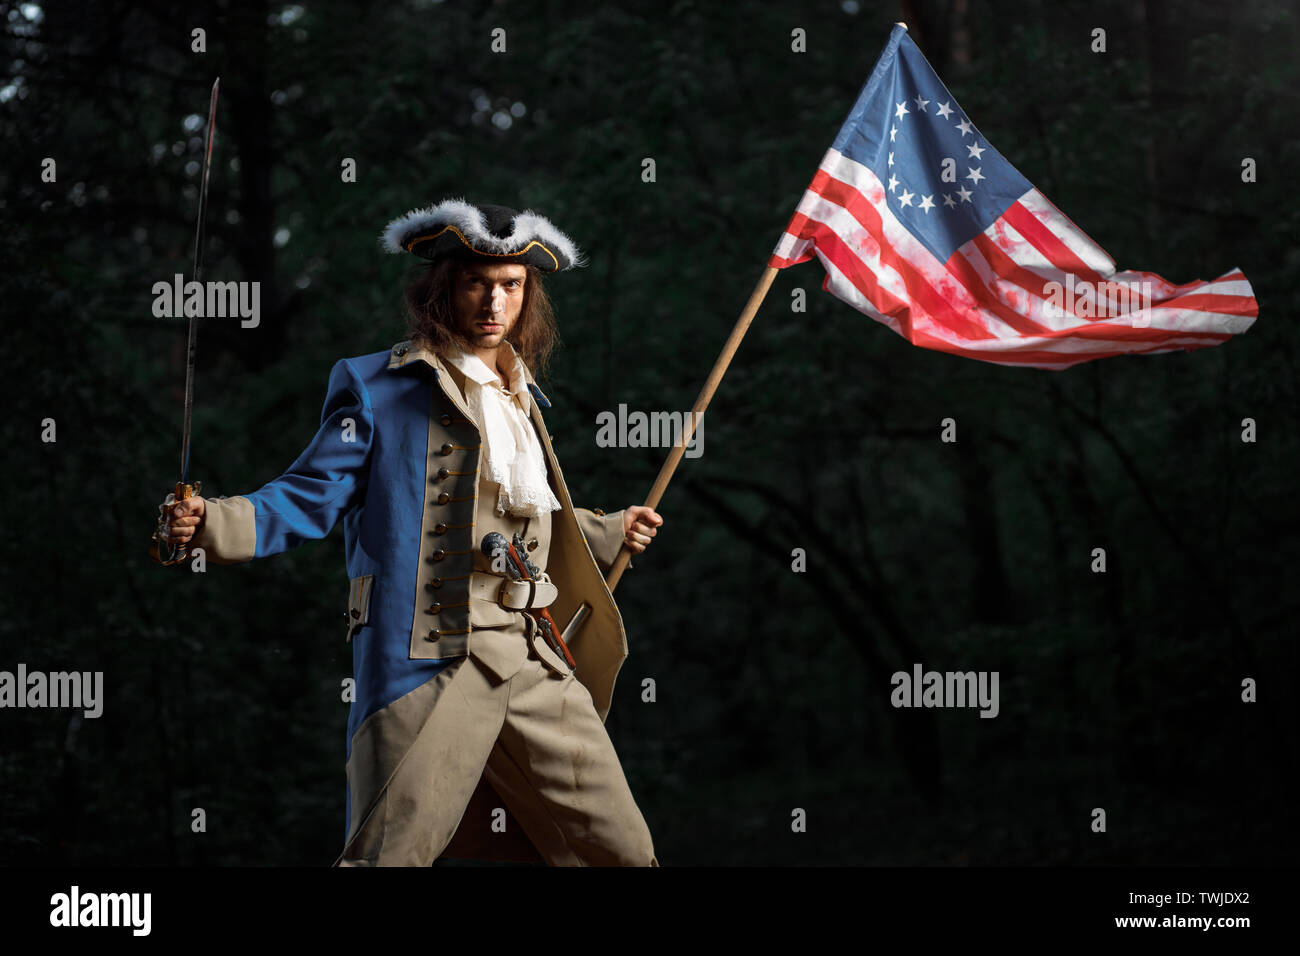 Soldier patriot rebel during war of independence of  United States with flag preparing to attack with sword Stock Photo